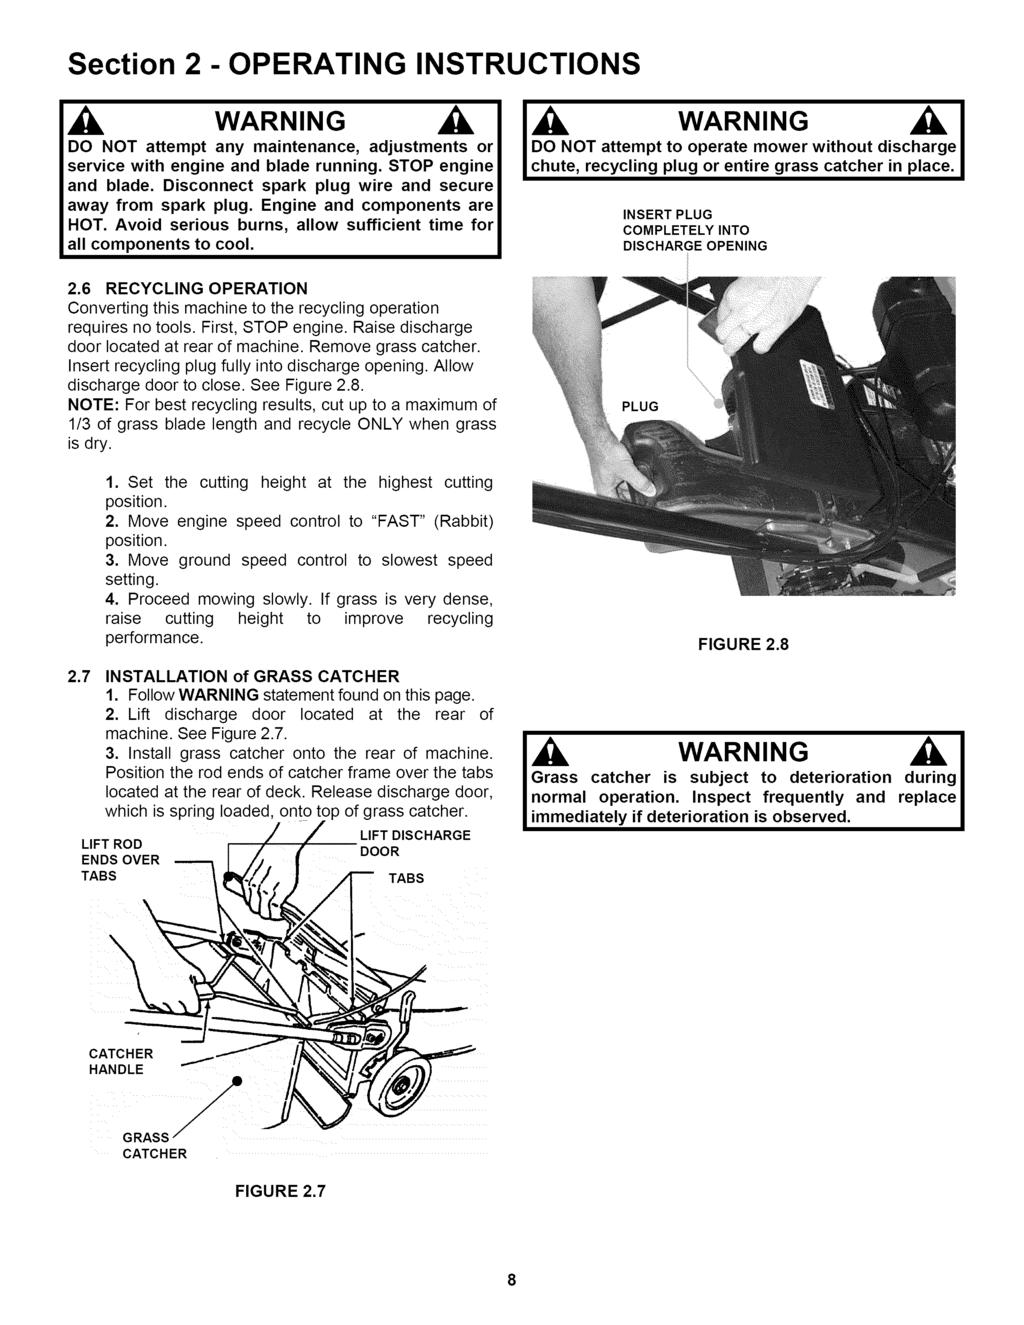 Section 2 -OPERATING INSTRUCTIONS DO NOT attempt any maintenance, adjustments or service with engine and blade running. STOP engine and blade.